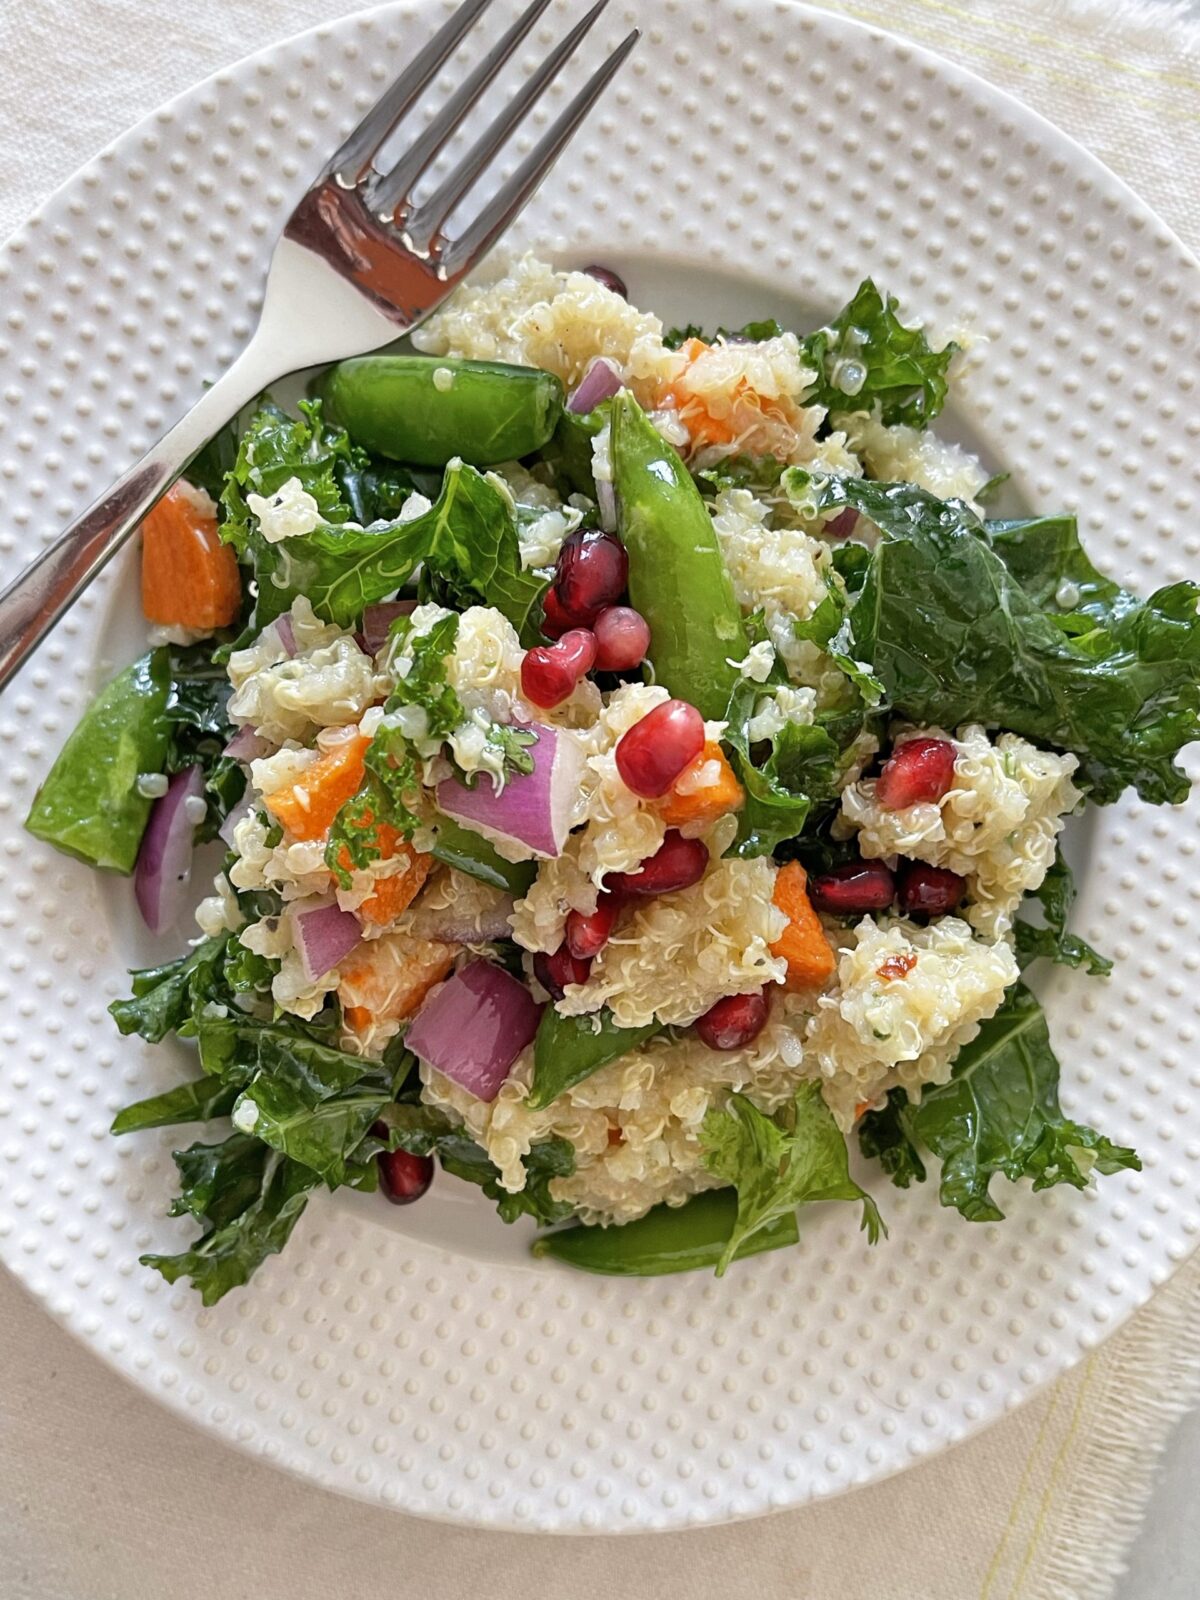 Crunchy Quinoa Salad with Lemon Lime Vinaigrette Recipe. This is an easy meal prep healthy recipe you can eat all week. Pick you favorite crunchy veggies and tangy dressing and dinner is served. www.ChopHappy.com #quinoarecipe #healthydinnerrecipe